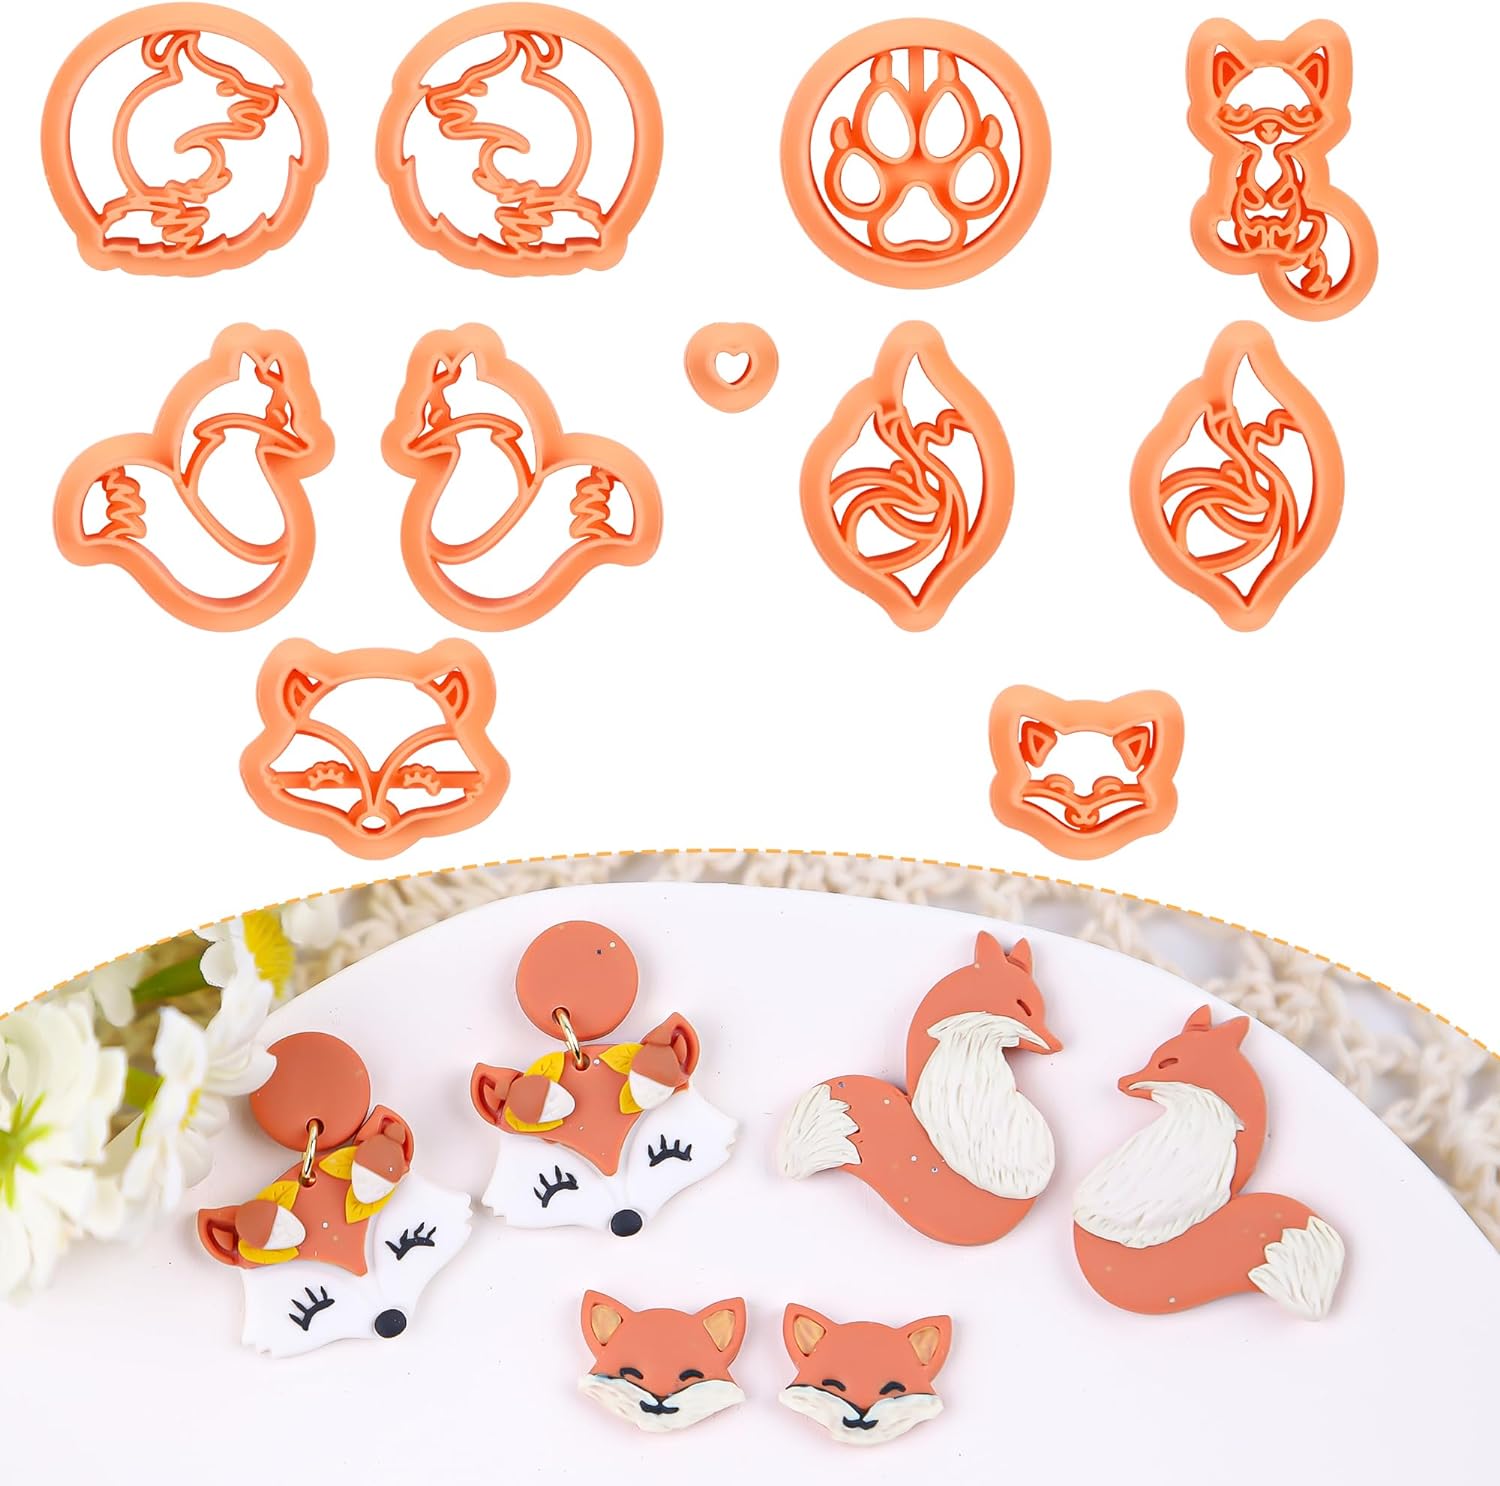  Puocaon 70s Valentines Clay Cutters - 10 Pcs Clay